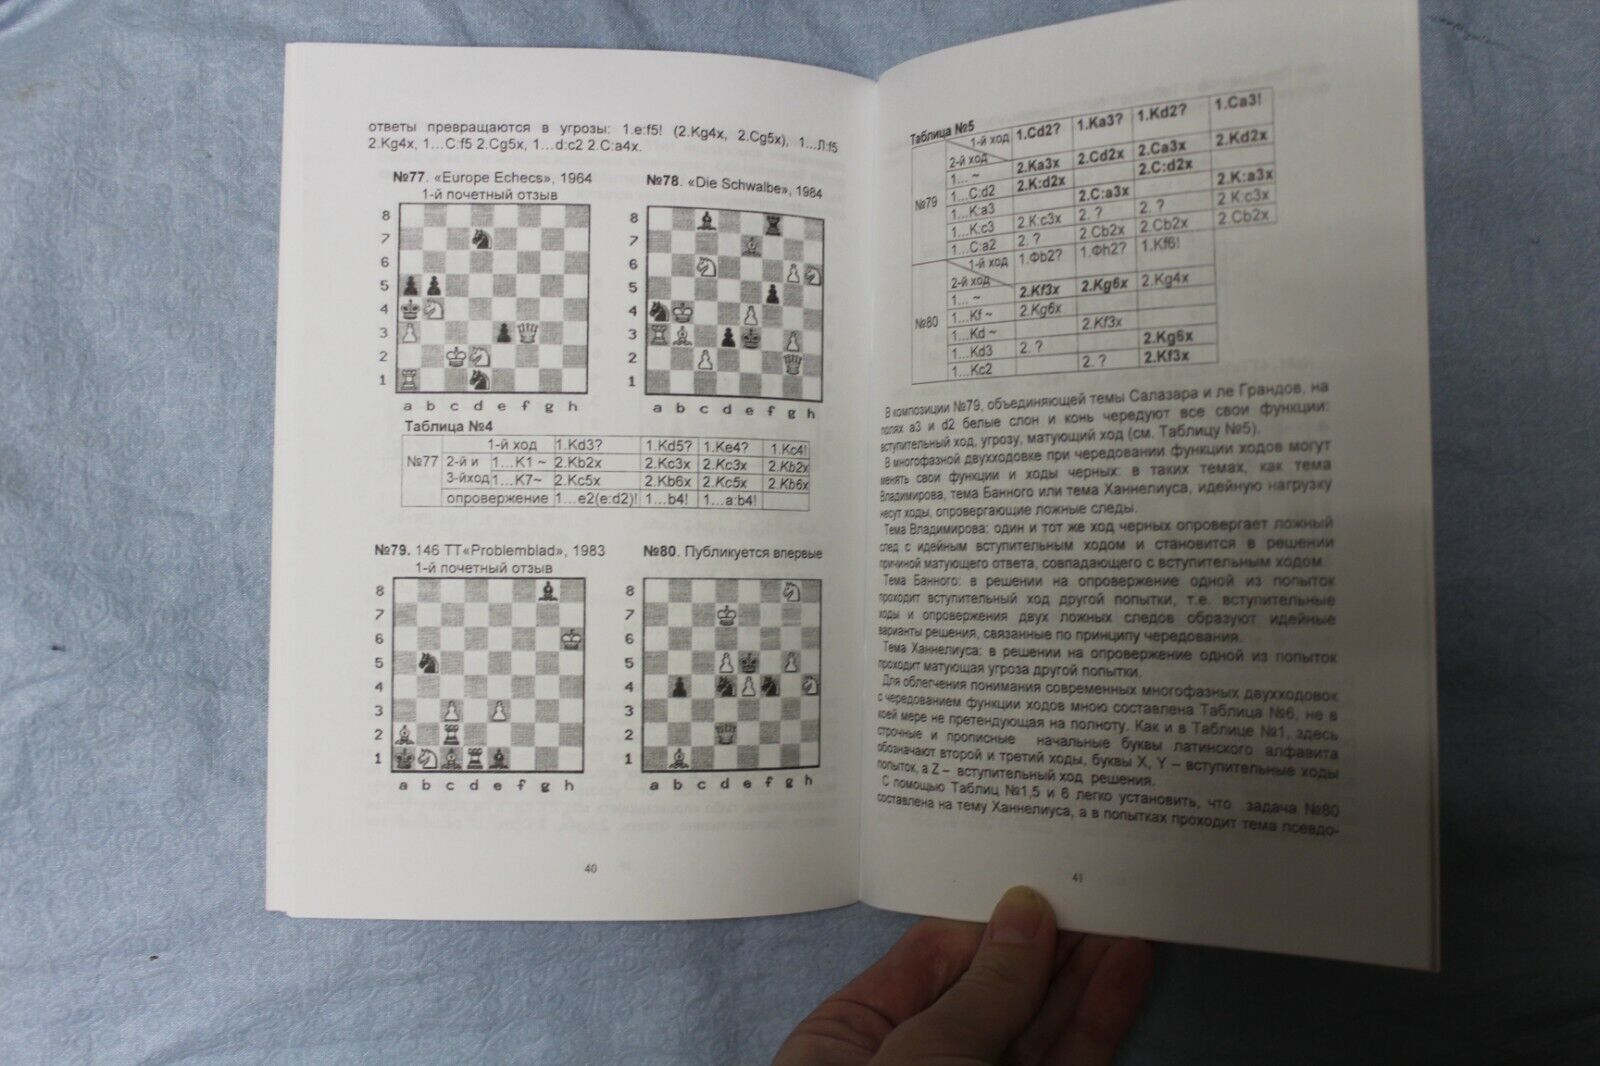 11378.My Two-Way, Chess Problems, V. Lider, Moscow, 2007